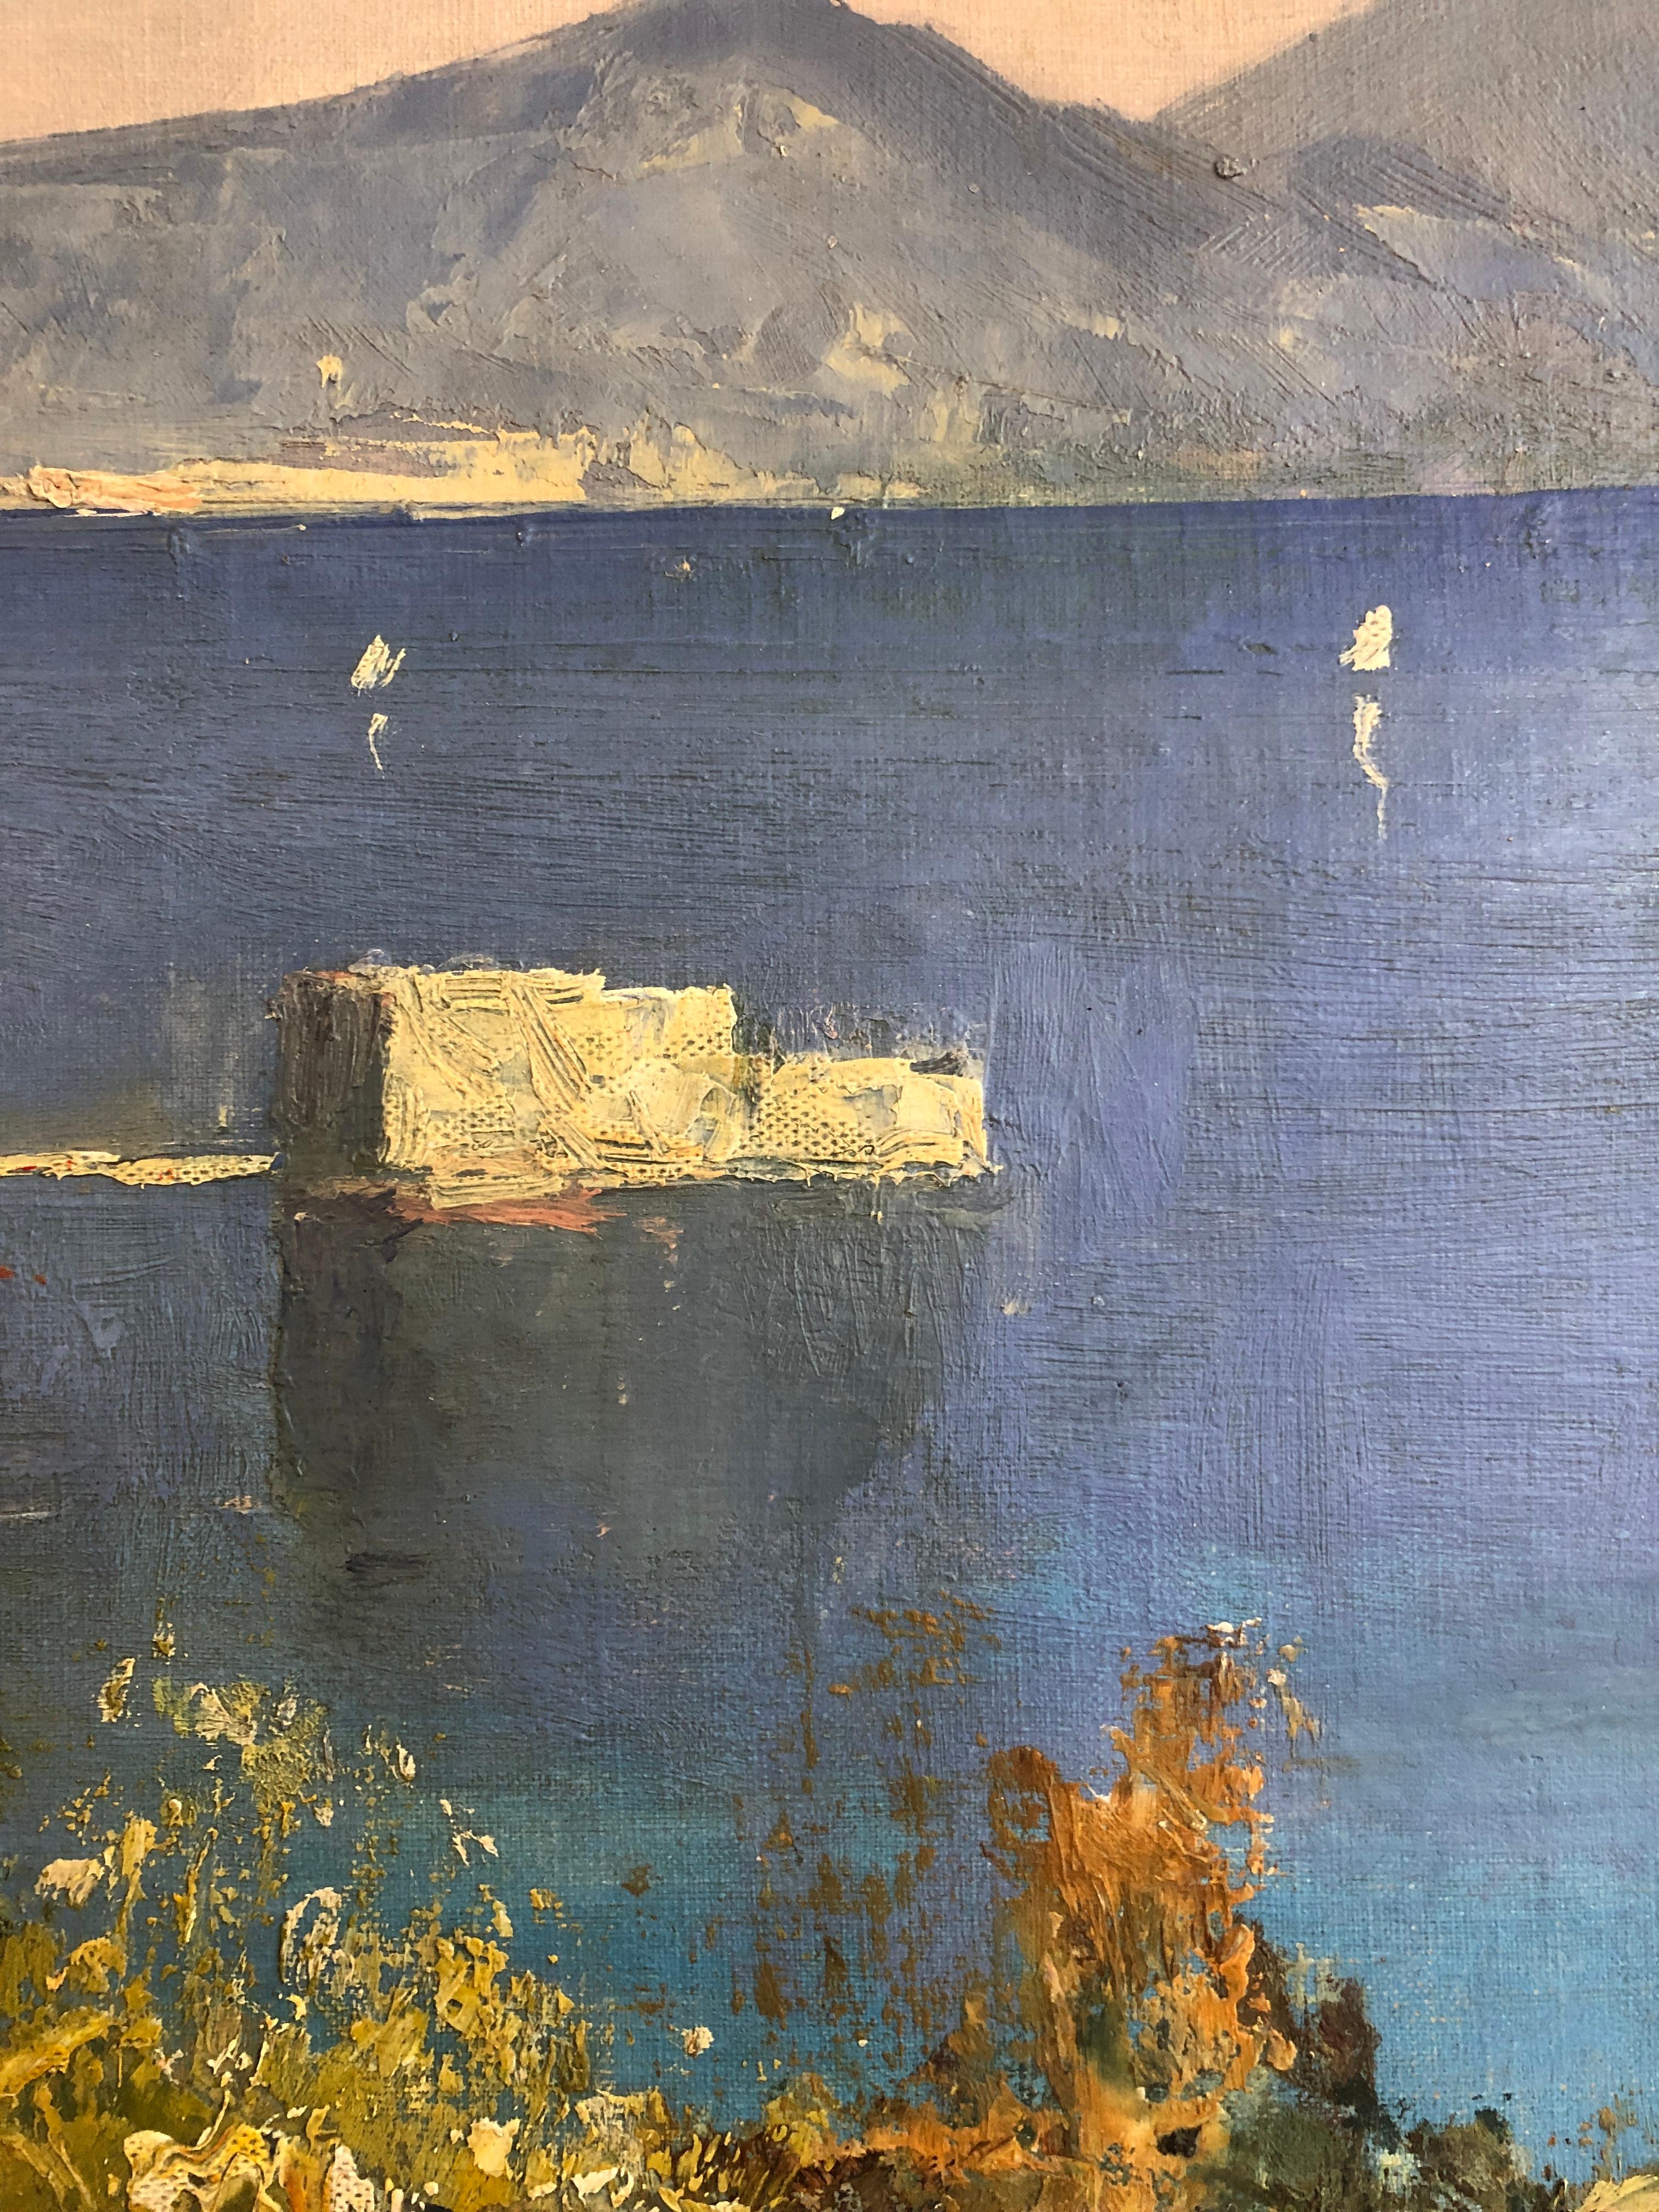 Bay of Naples and view of Vesuvius - Modern Painting by U.Maresca